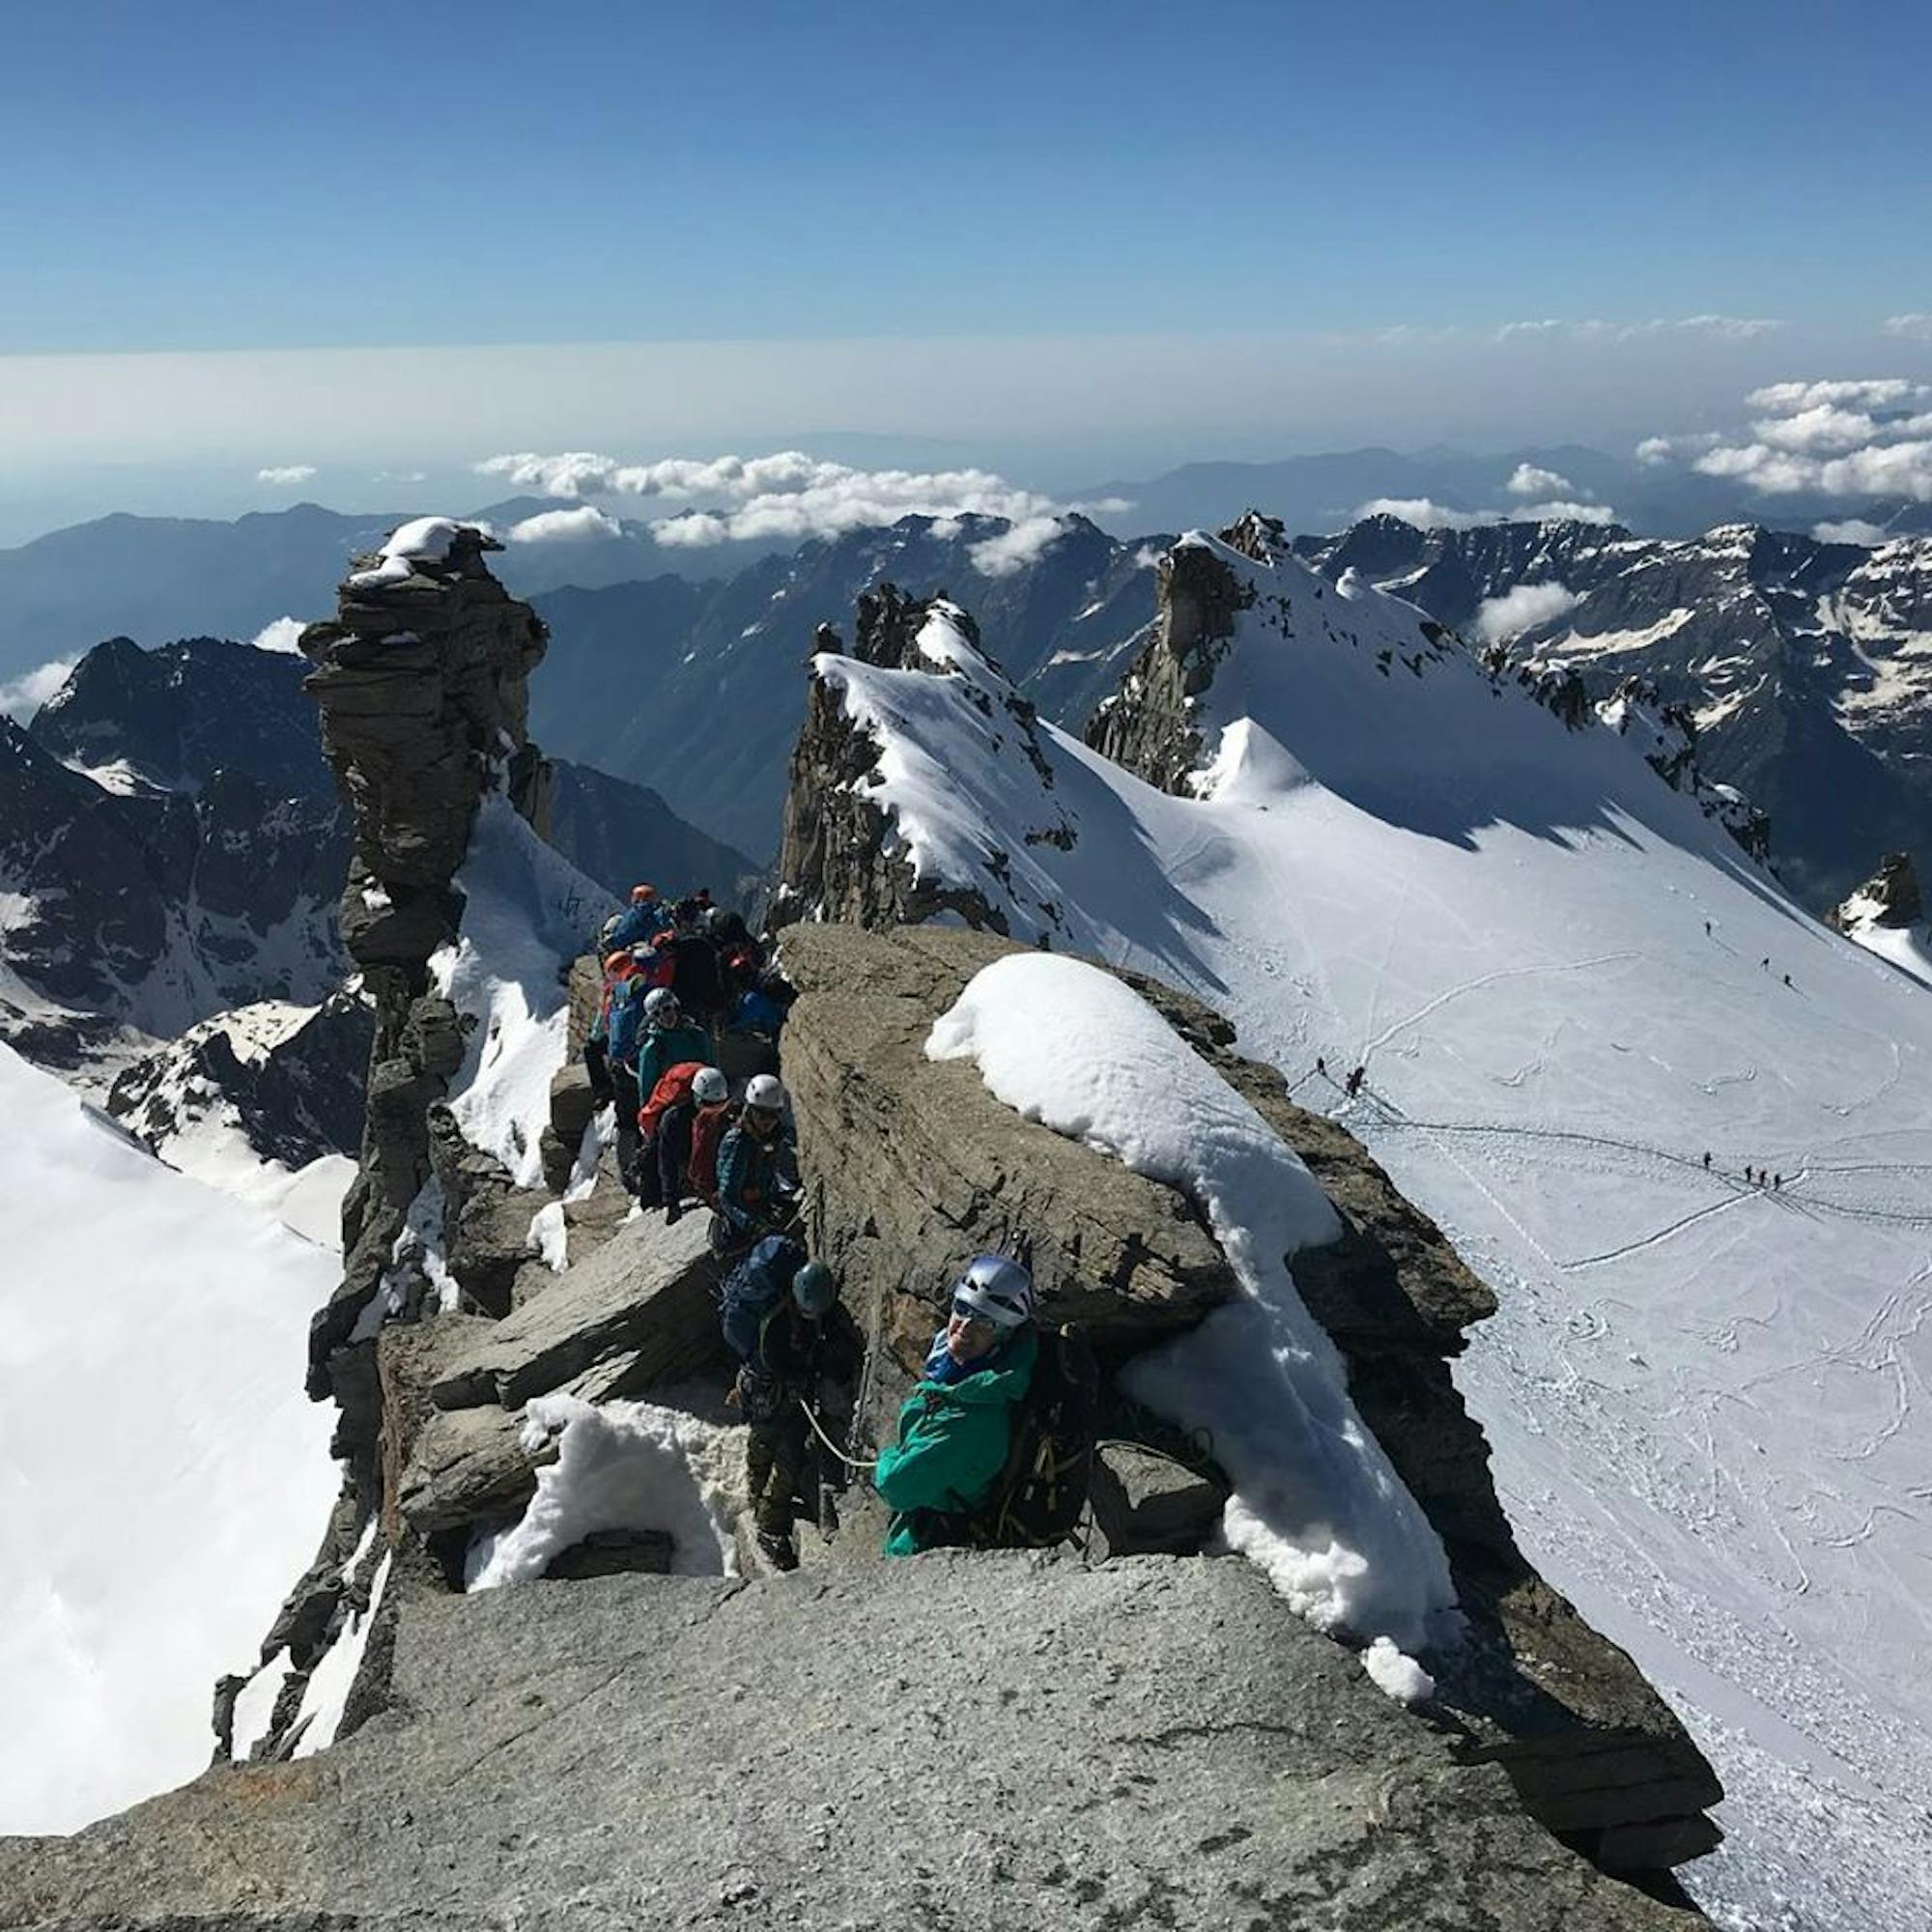 Looking down from the Madonna on Gran Paradiso.